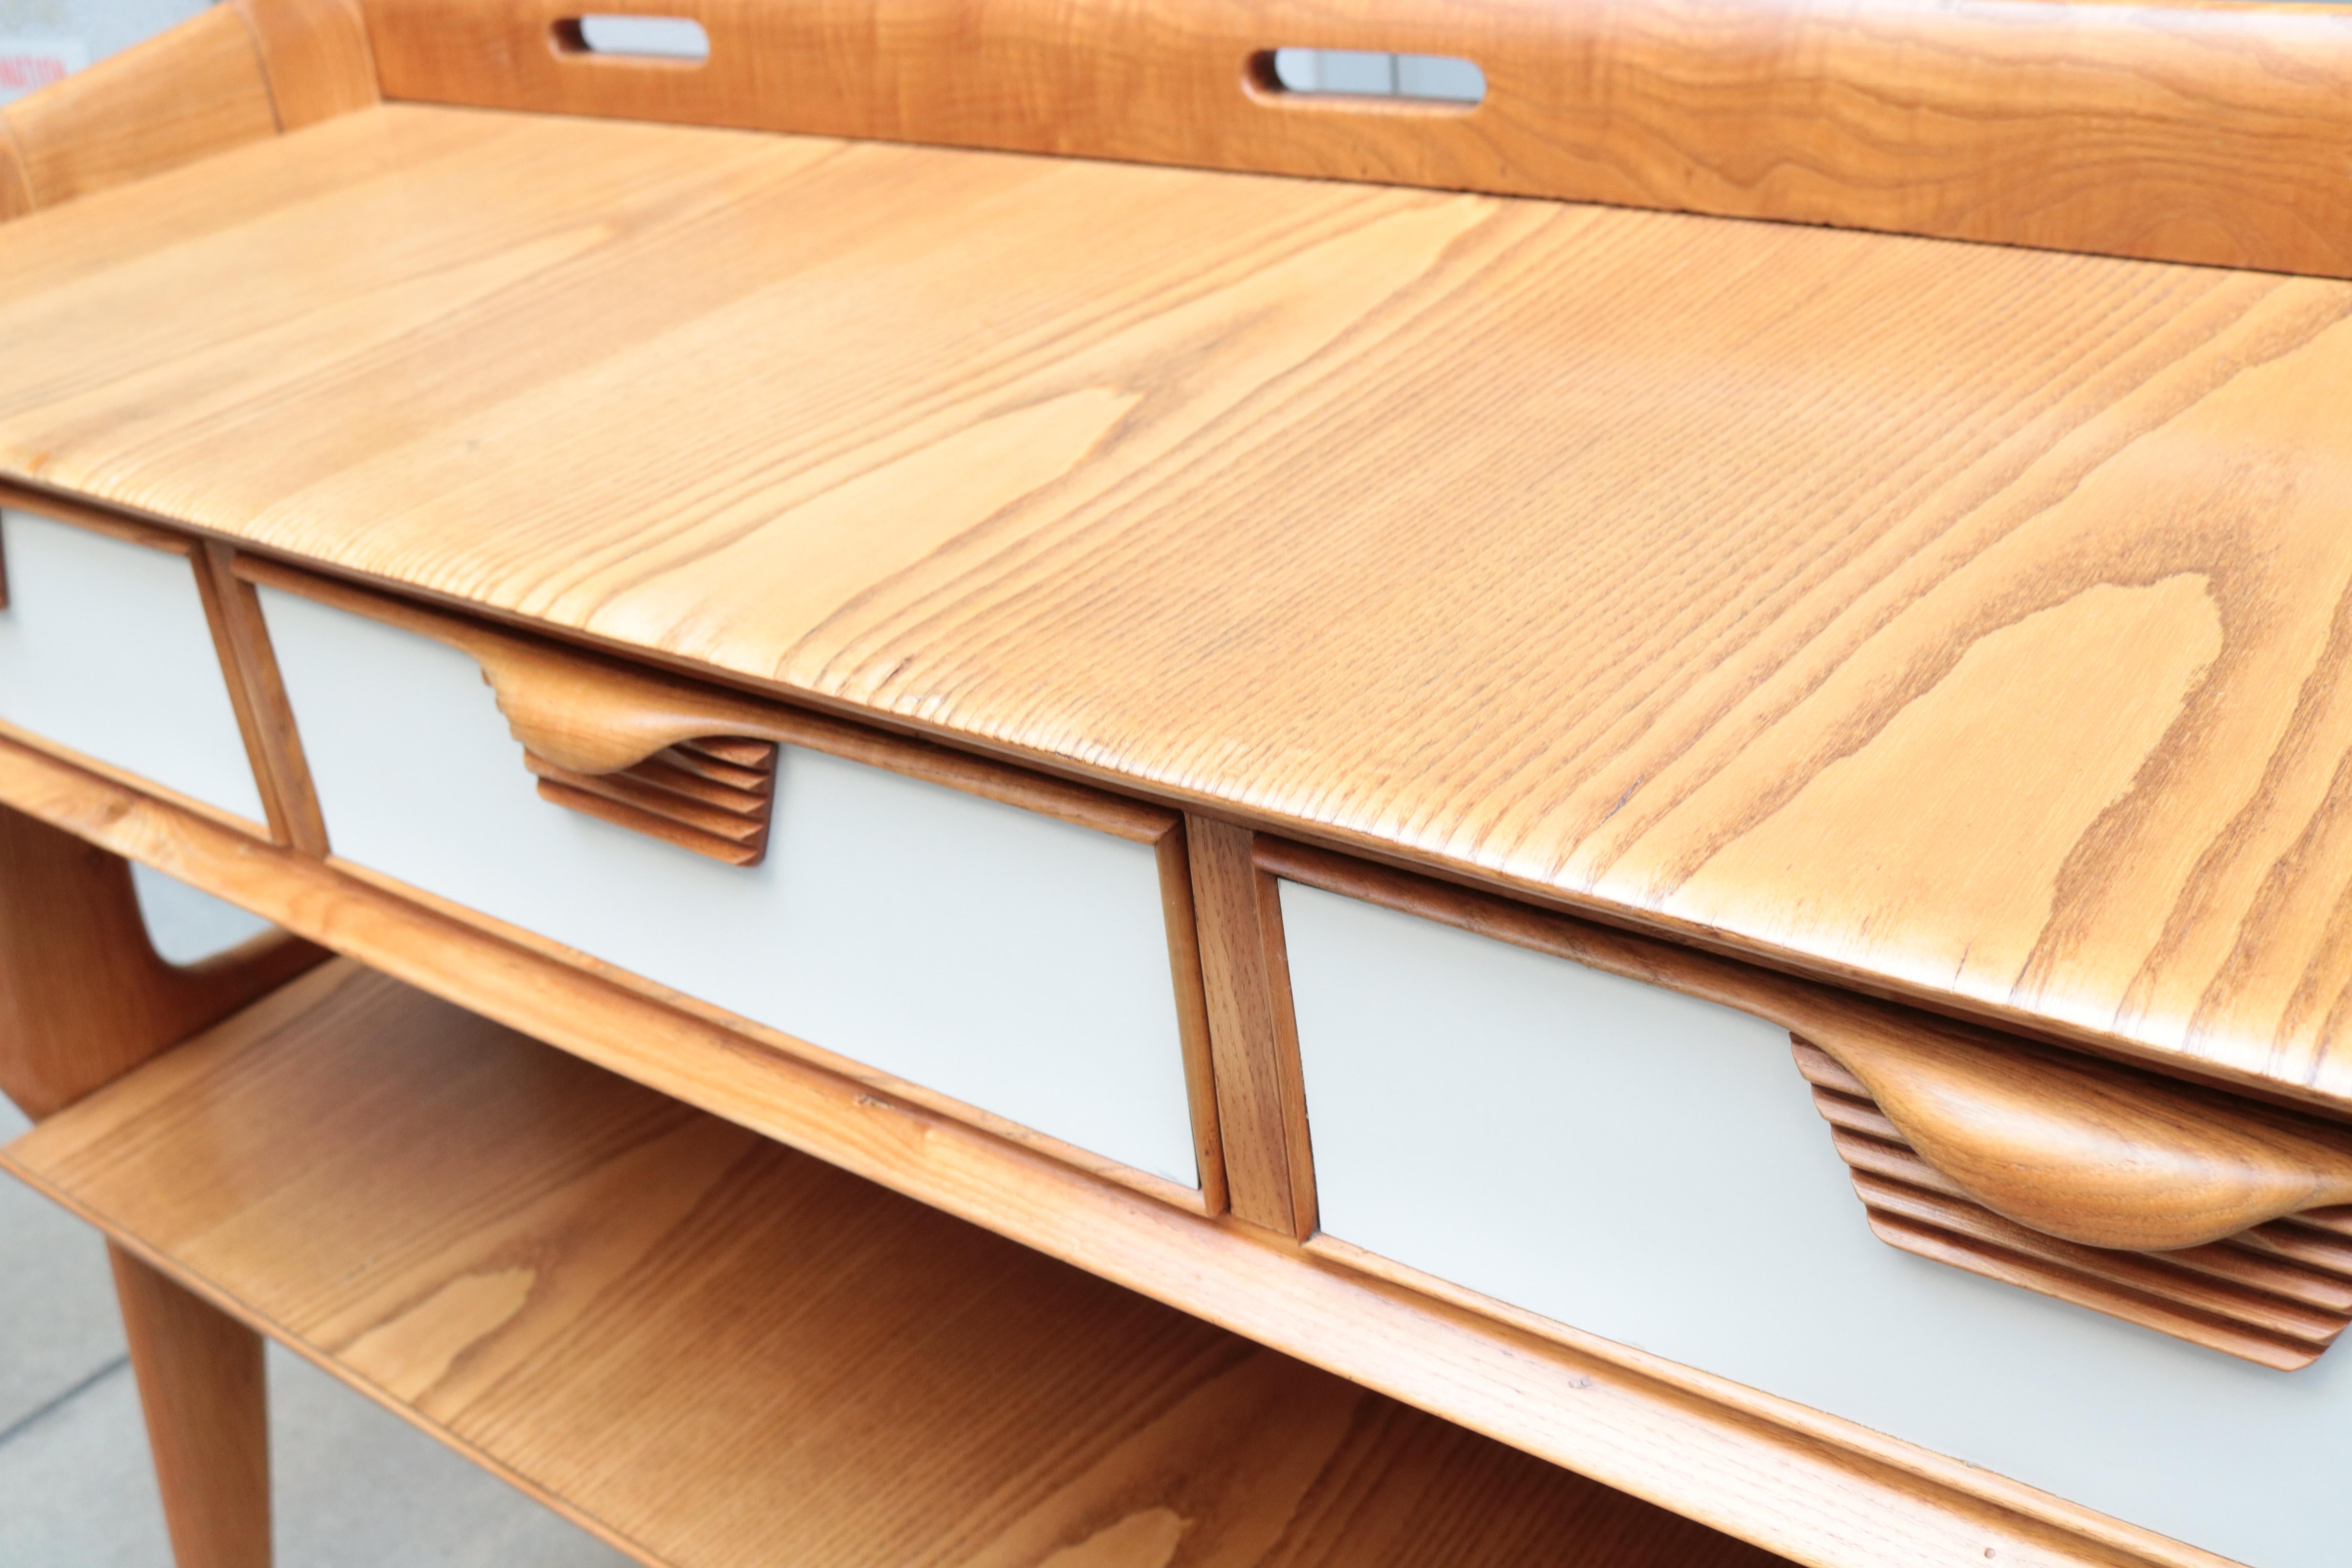 Italian Modernist two-tier console. 
Oak with laminate faced drawers.